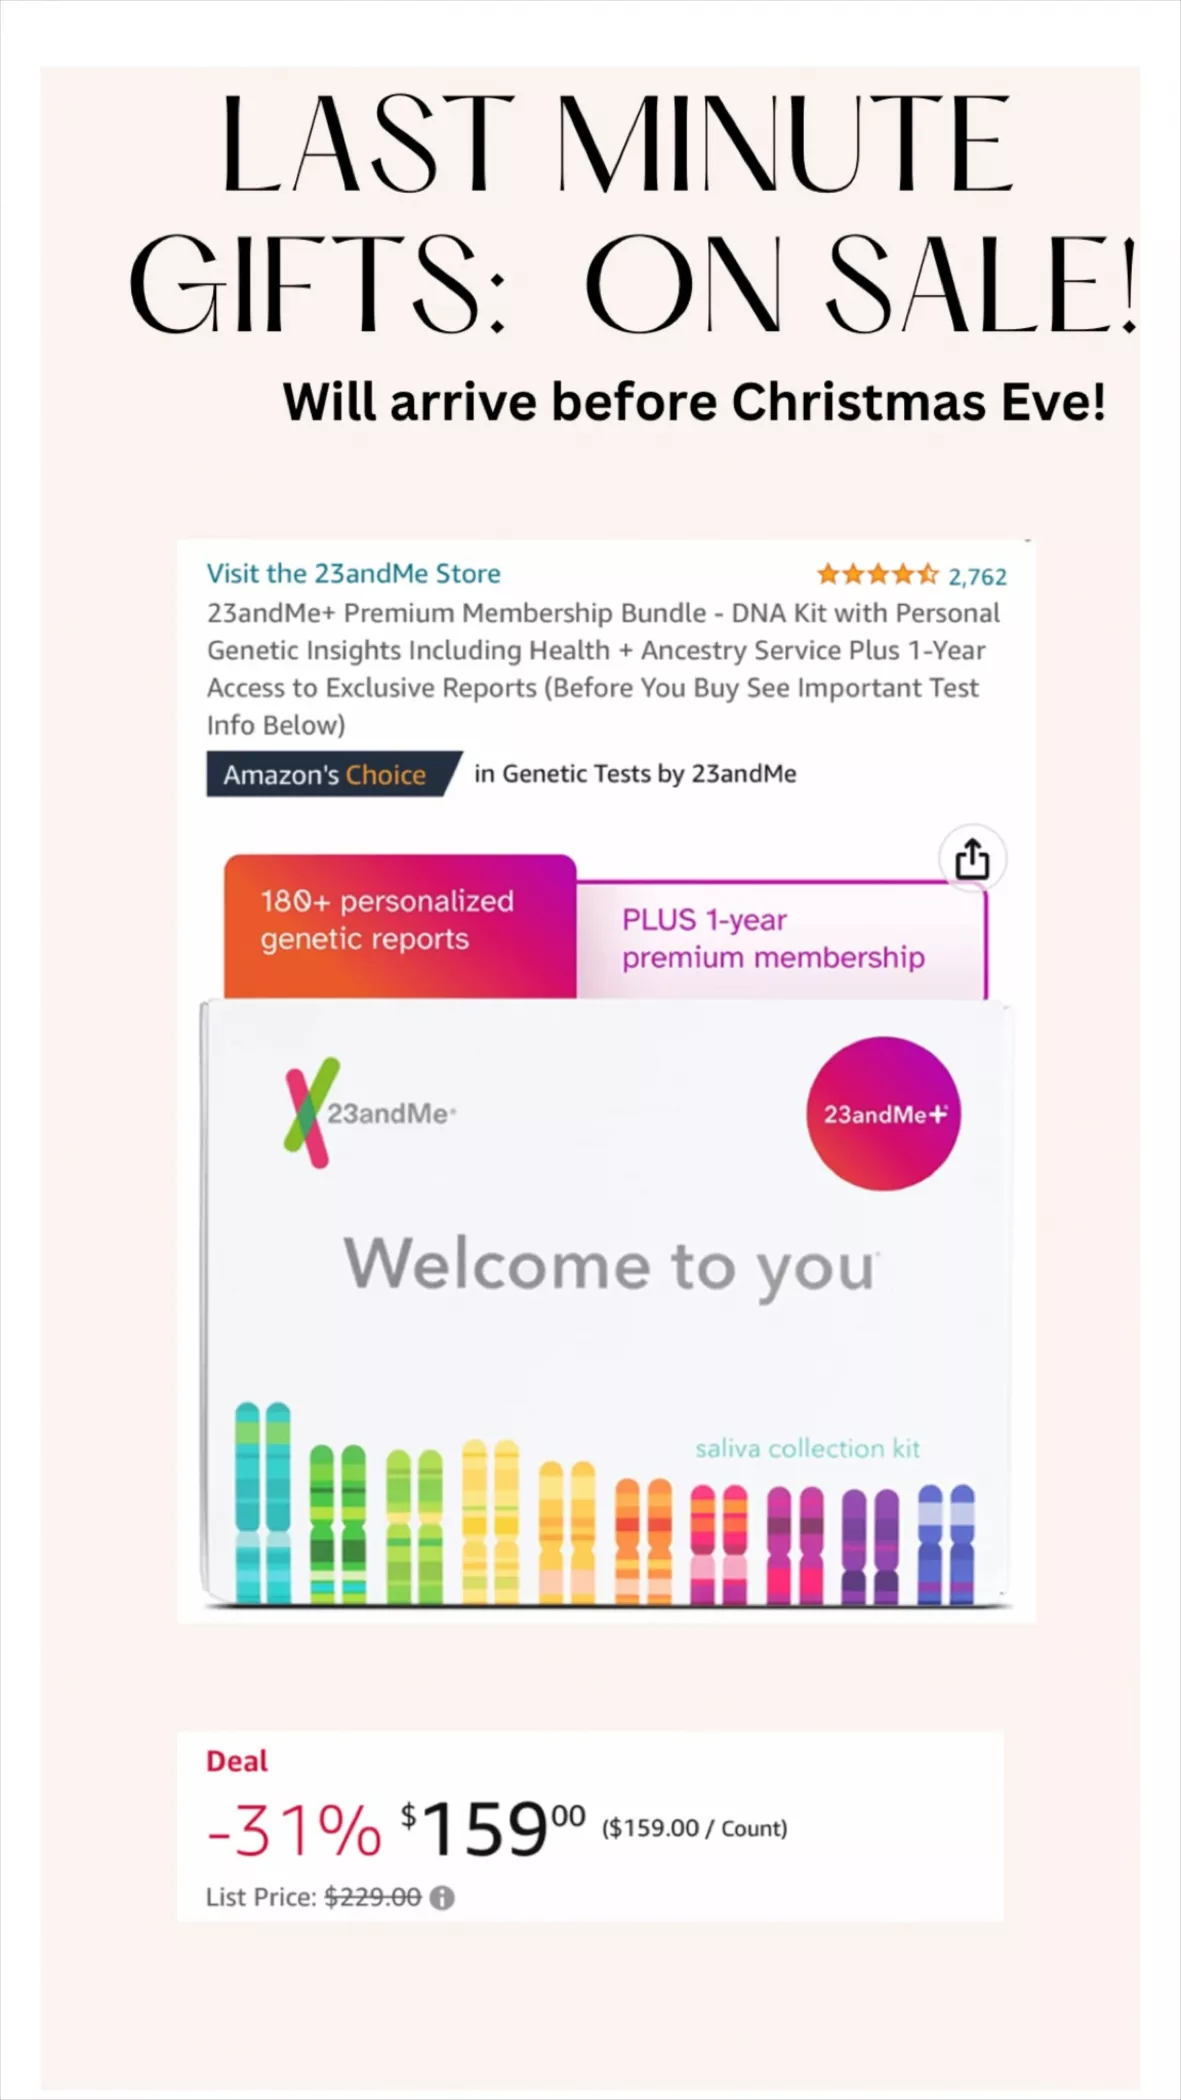  23andMe+ Premium Membership Bundle - DNA Kit with Personal  Genetic Insights Including Health + Ancestry Service Plus 1-Year Access to  Exclusive Reports (Before You Buy See Important Test Info Below) 